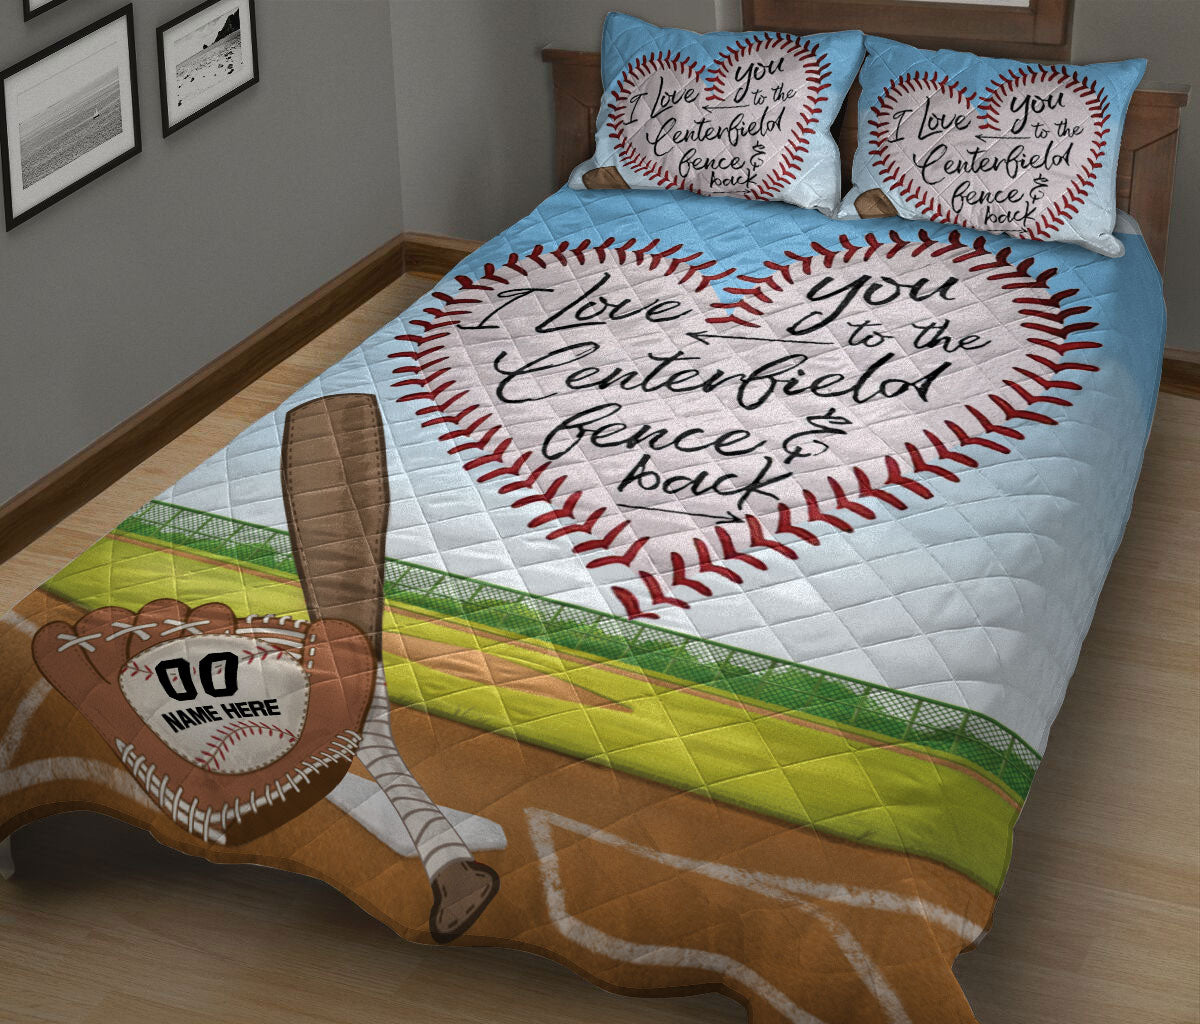 Ohaprints-Quilt-Bed-Set-Pillowcase-Baseball-I-Love-You-To-The-Centerfield-Fence-And-Back-Custom-Personalized-Name-Blanket-Bedspread-Bedding-795-King (90'' x 100'')